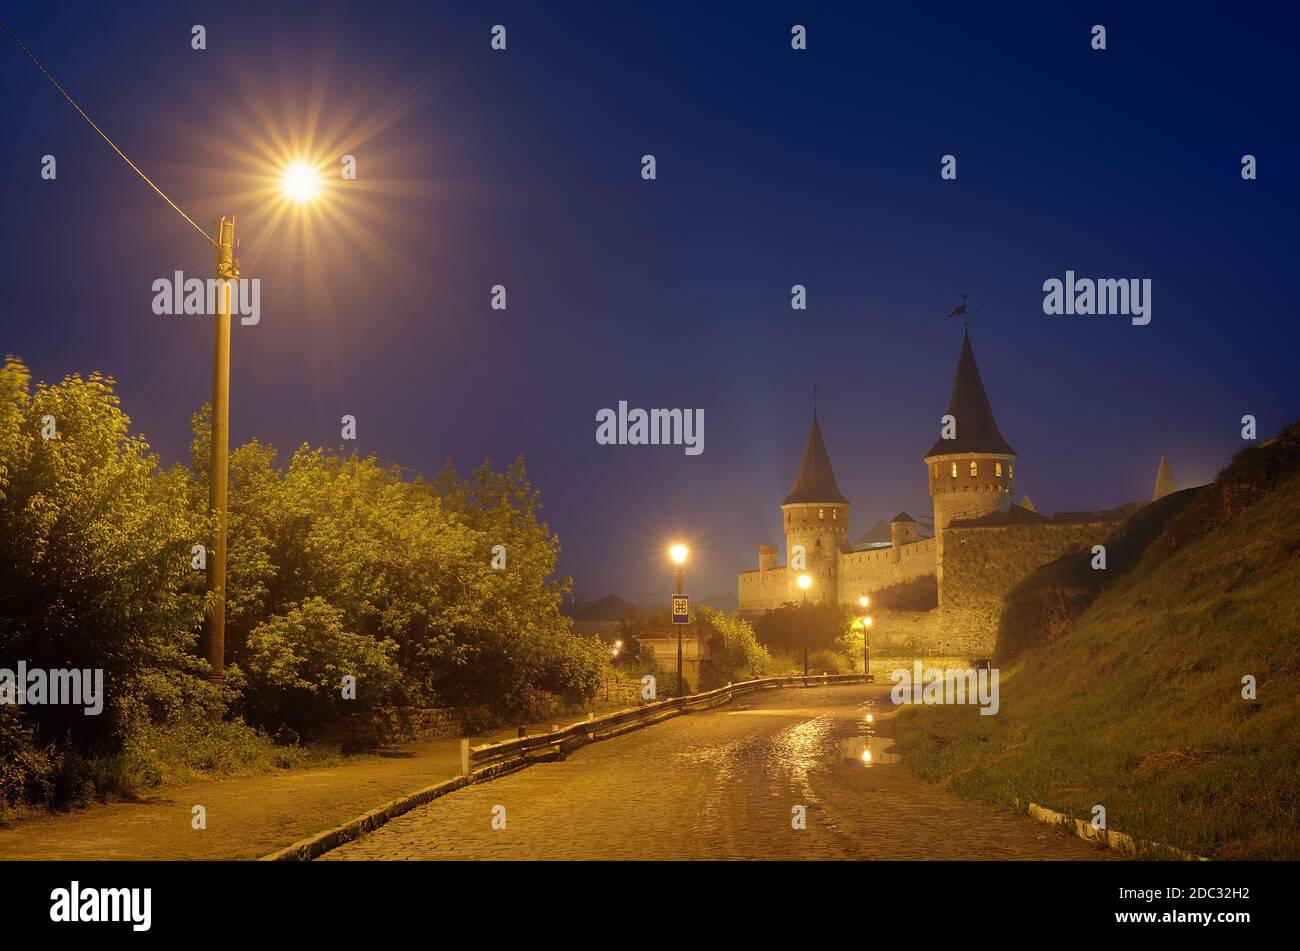 Night landscape with a road leading to the old fortress. Lamplight in the street. Historic Landmark. Old town of Kamenetz-Podolsk, Ukraine, Europe Stock Photo